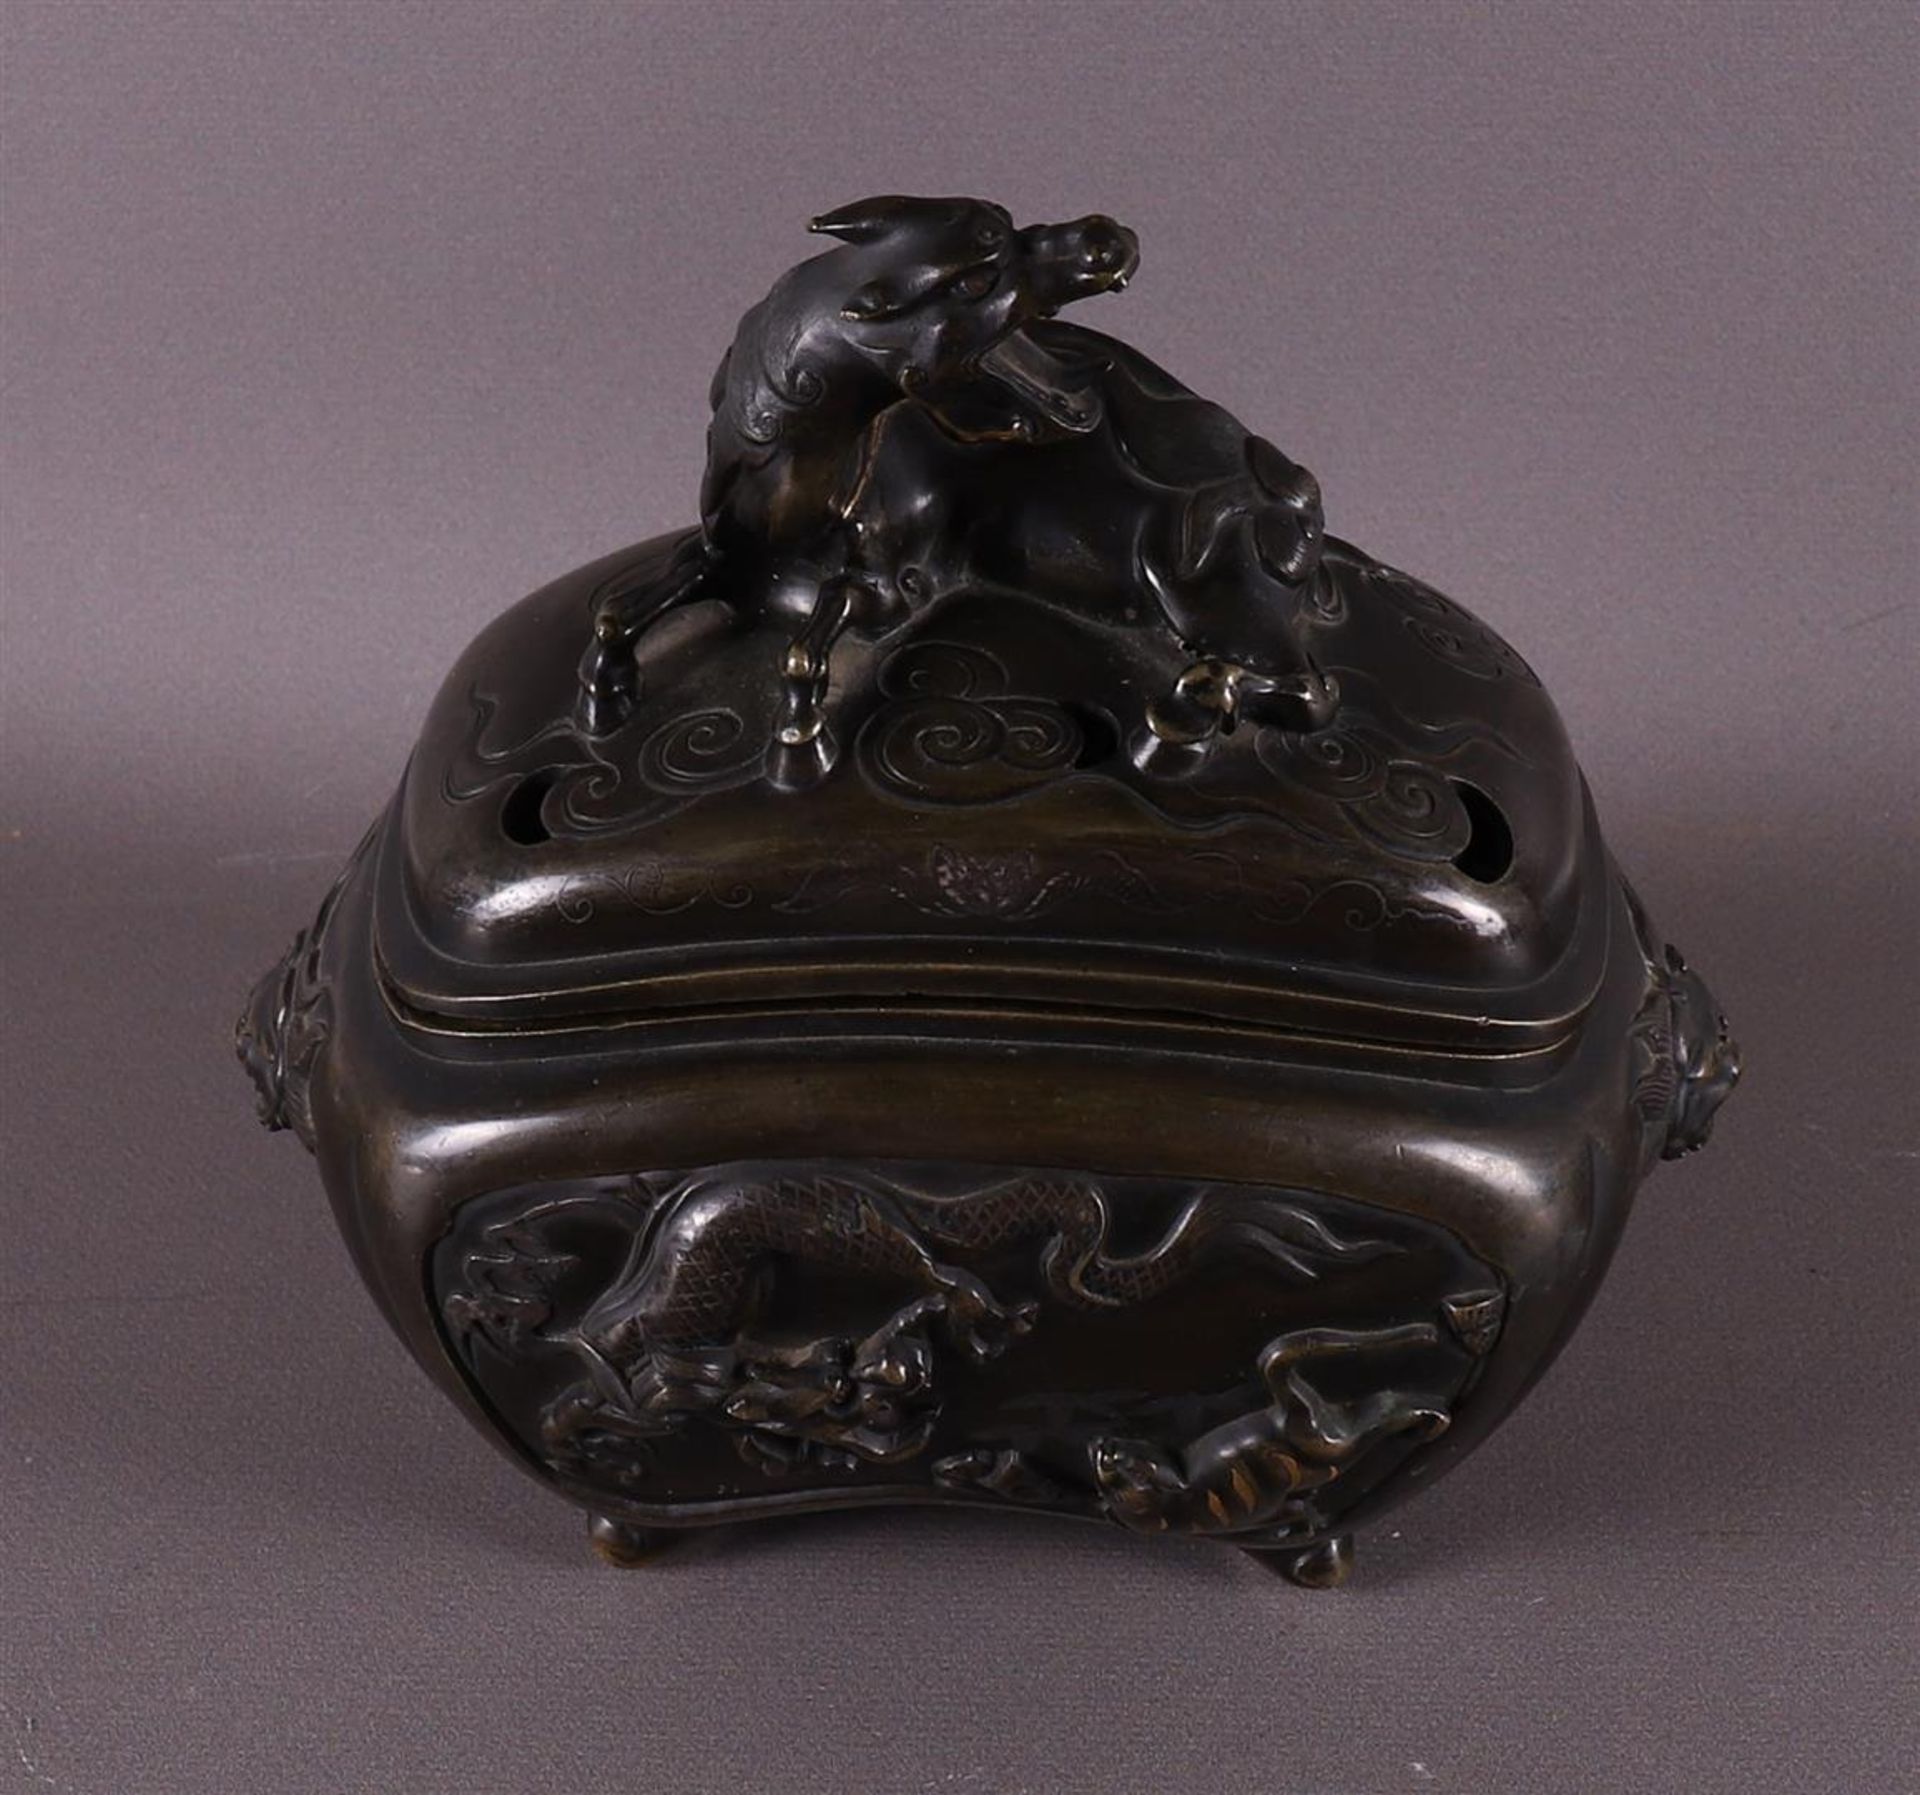 A brown patinated koro with dragon heads for ears, China, 2nd half 19th century. - Bild 2 aus 9